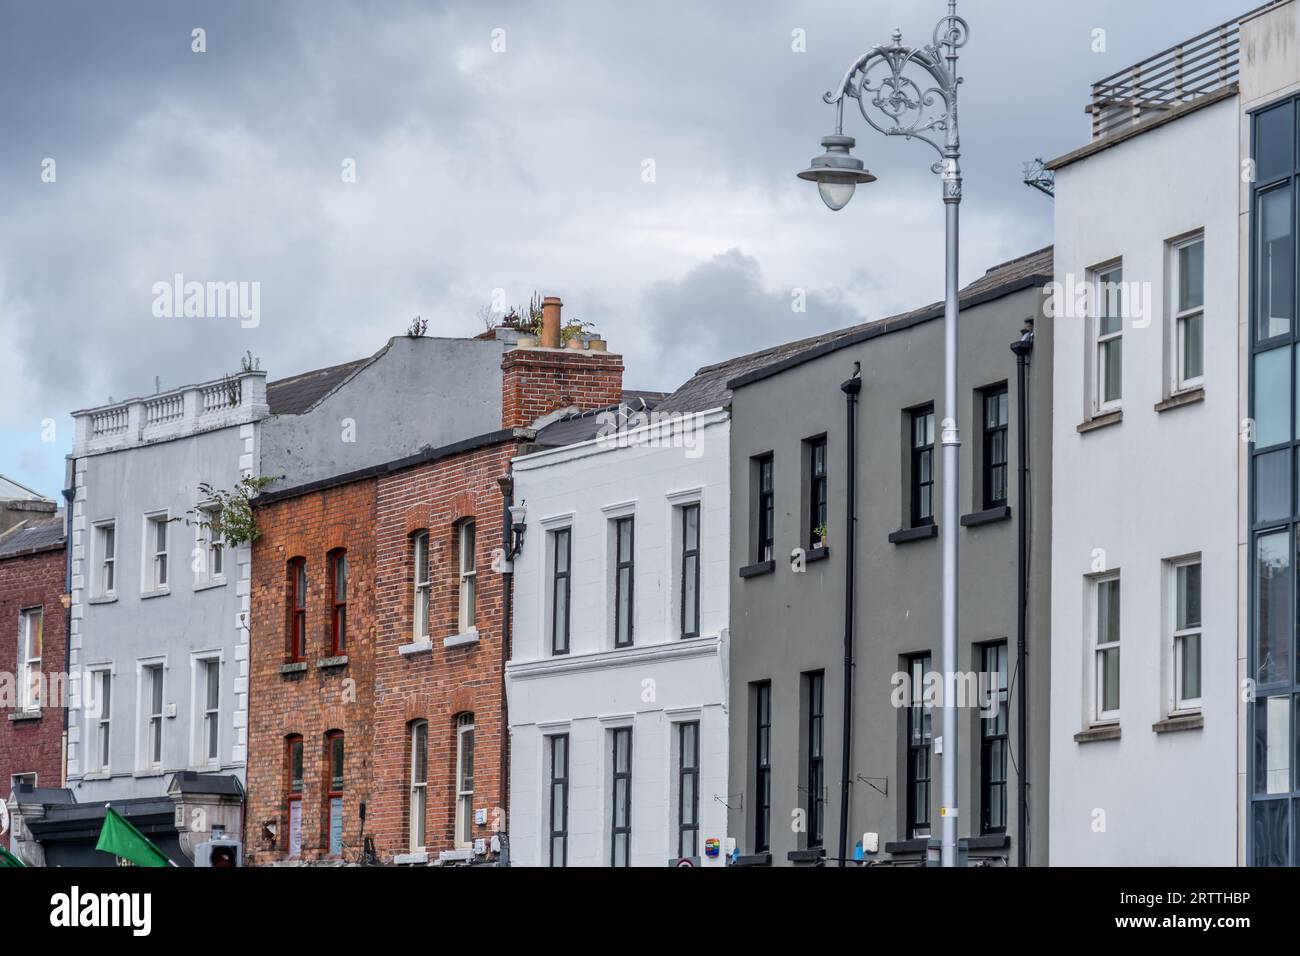 Typical Dublin city houses with brick facade and silver lamp post Stock Photo